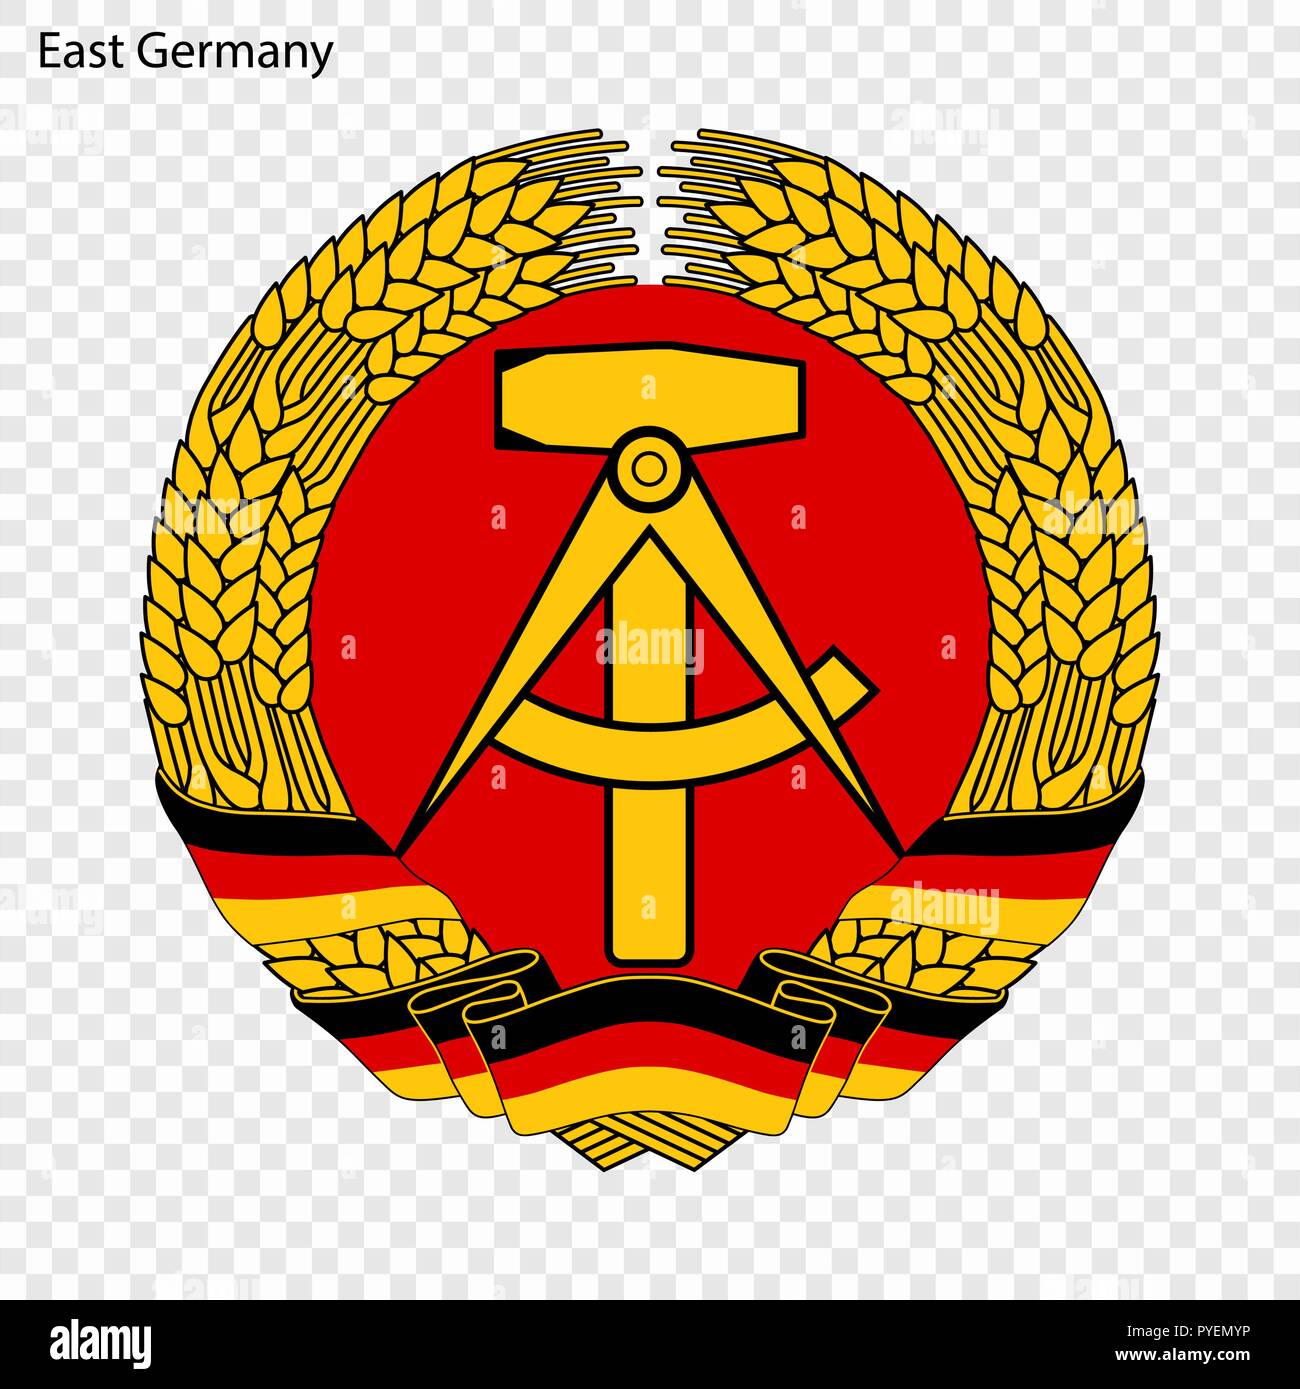 Old coat of arms East Germany Stock Vector